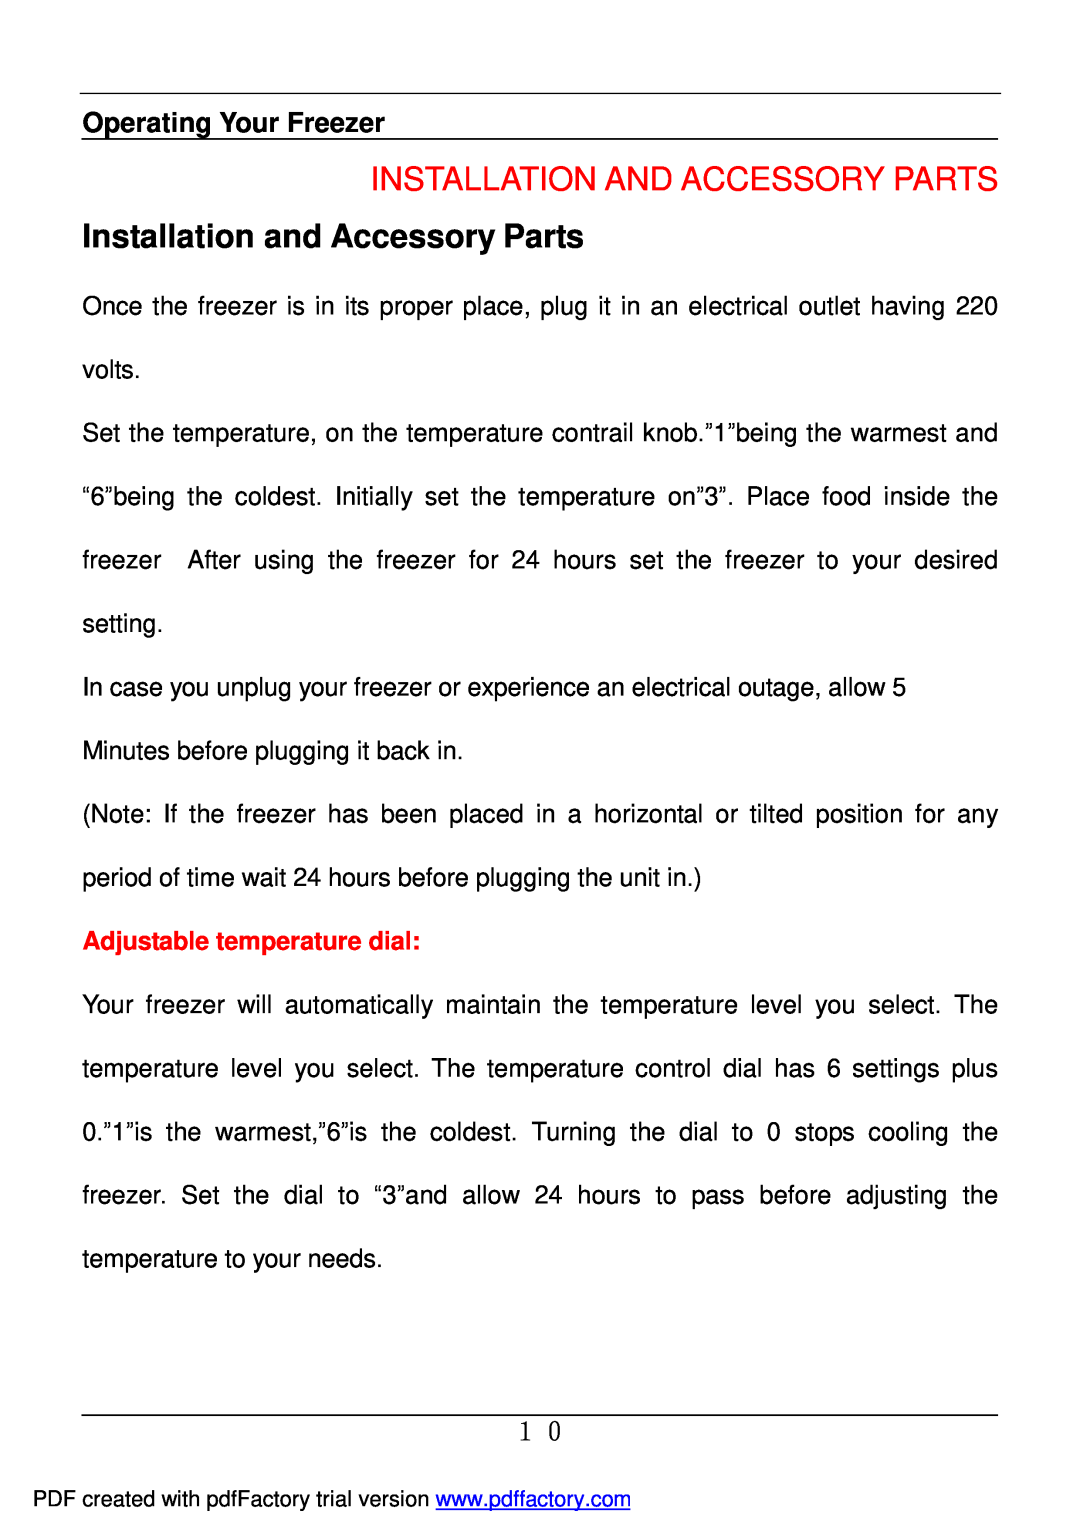 Haier BD-478A service manual Installation And Accessory Parts, Installation and Accessory Parts, Operating Your Freezer 